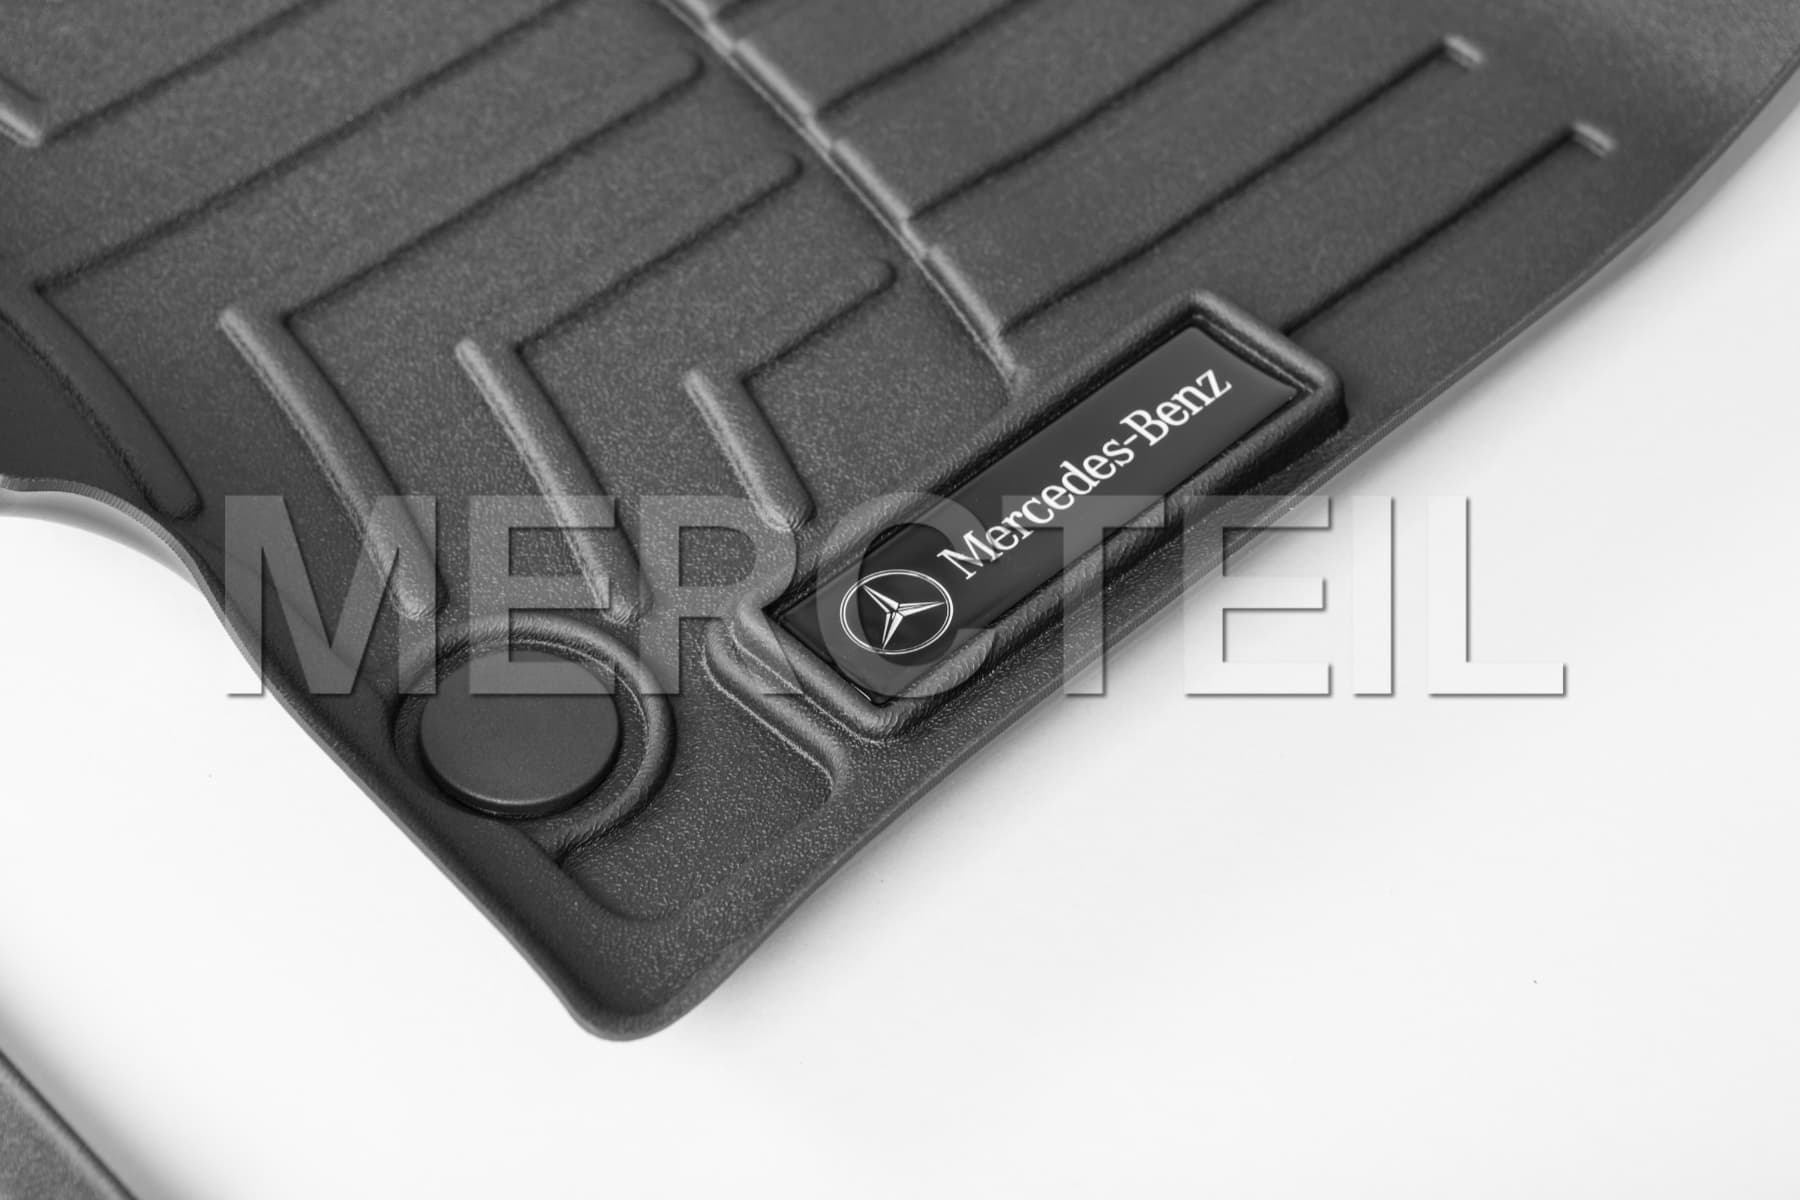 AMG Mercedes-Benz Genuine OEM Carpeted Floor Mats 2016 to 2019 GLE-Class W166